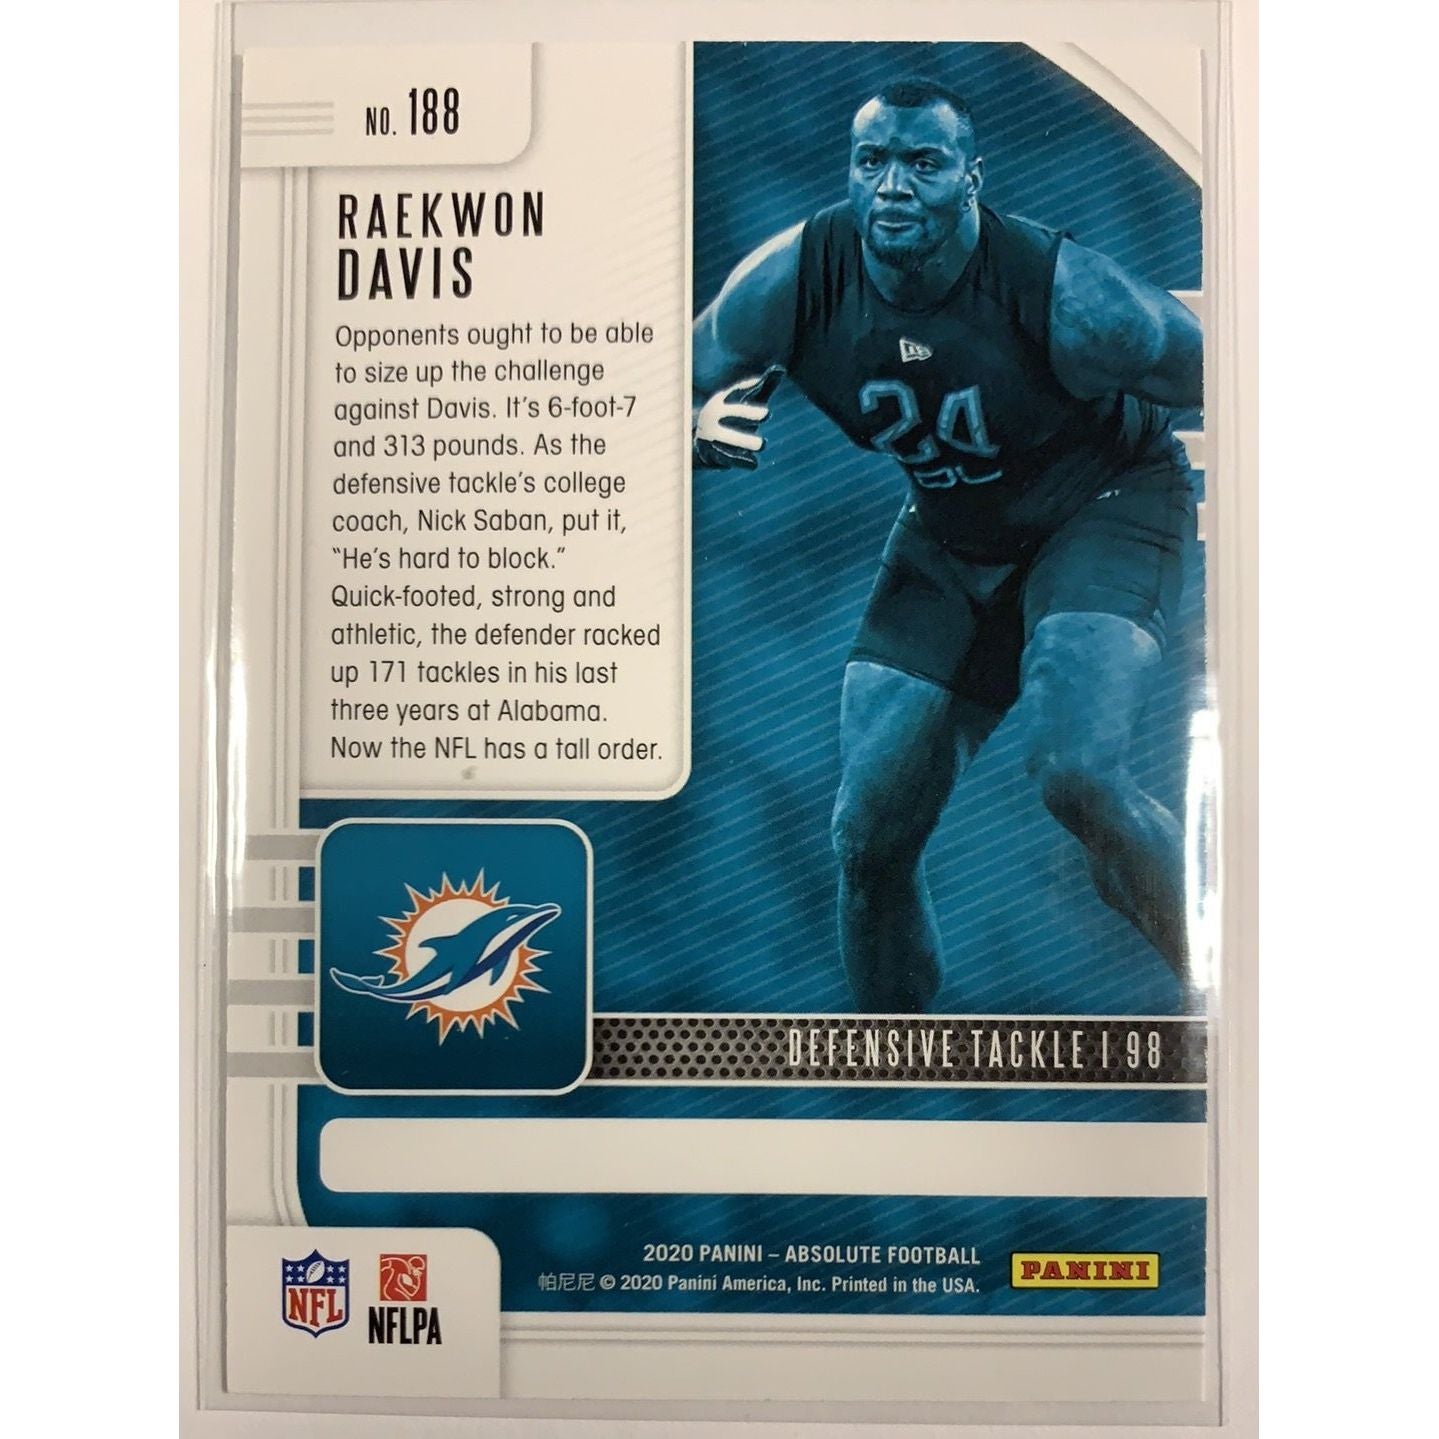  2020 Panini Absolute Raekwon Davis RC  Local Legends Cards & Collectibles